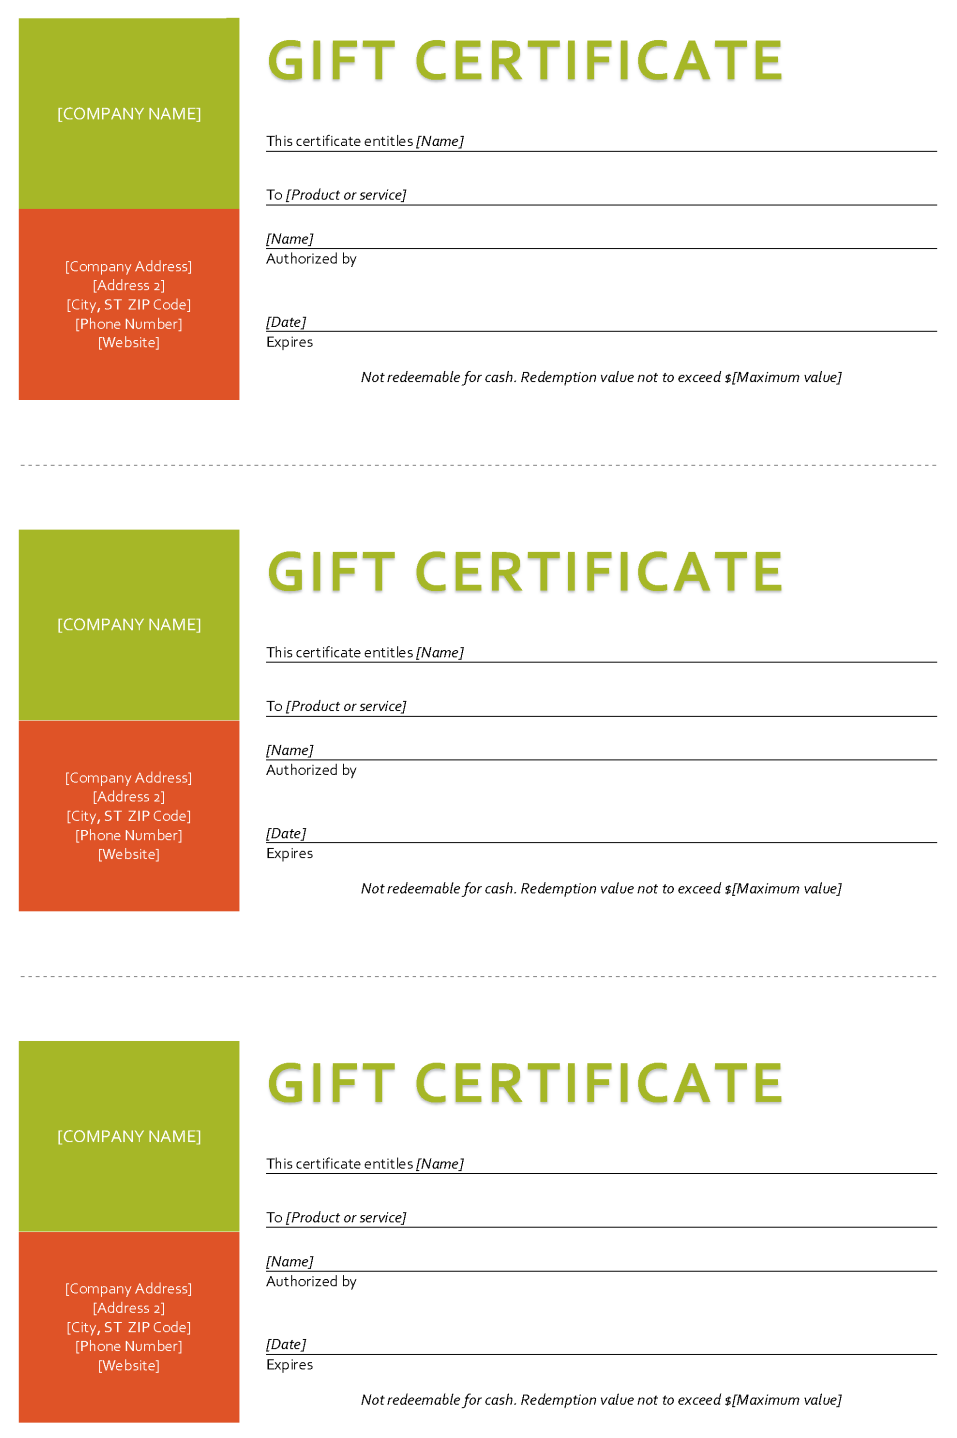 Gift Certificate Template Sample Gift Certificate